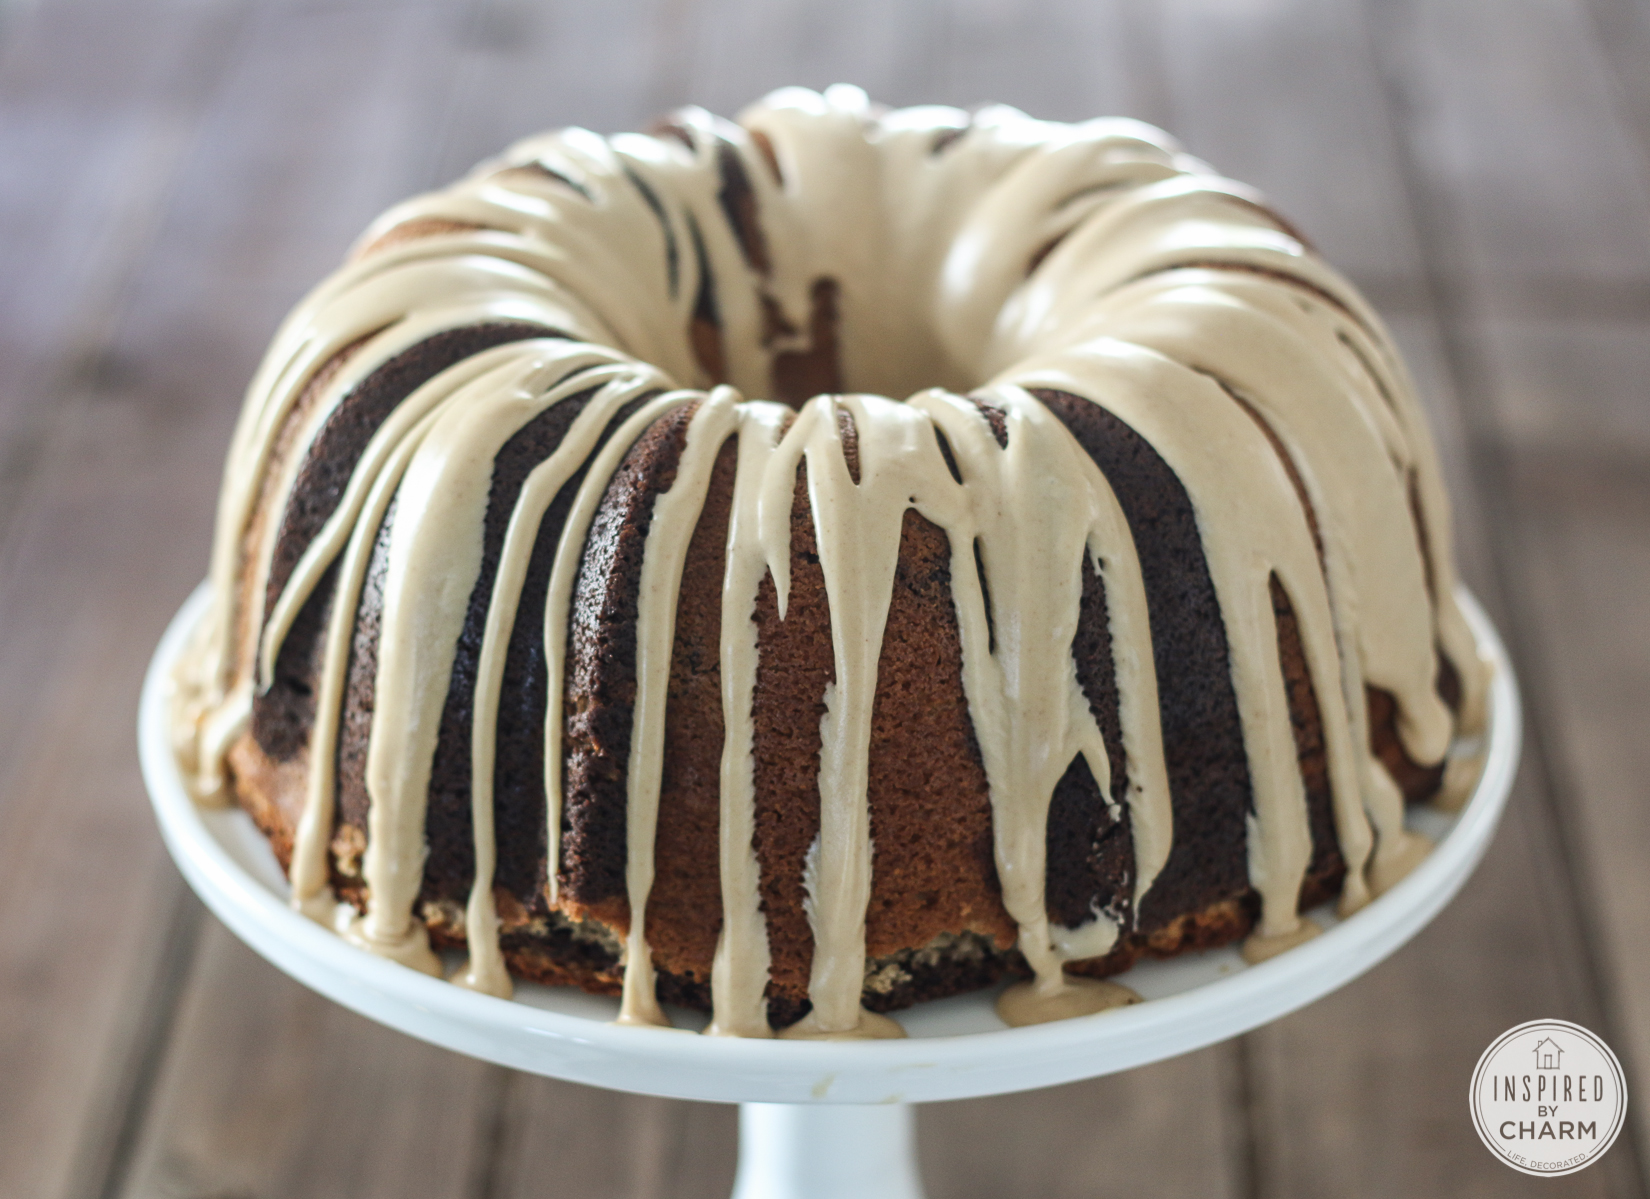 chocolate peanut butter bundt cake served on a white cake stand.